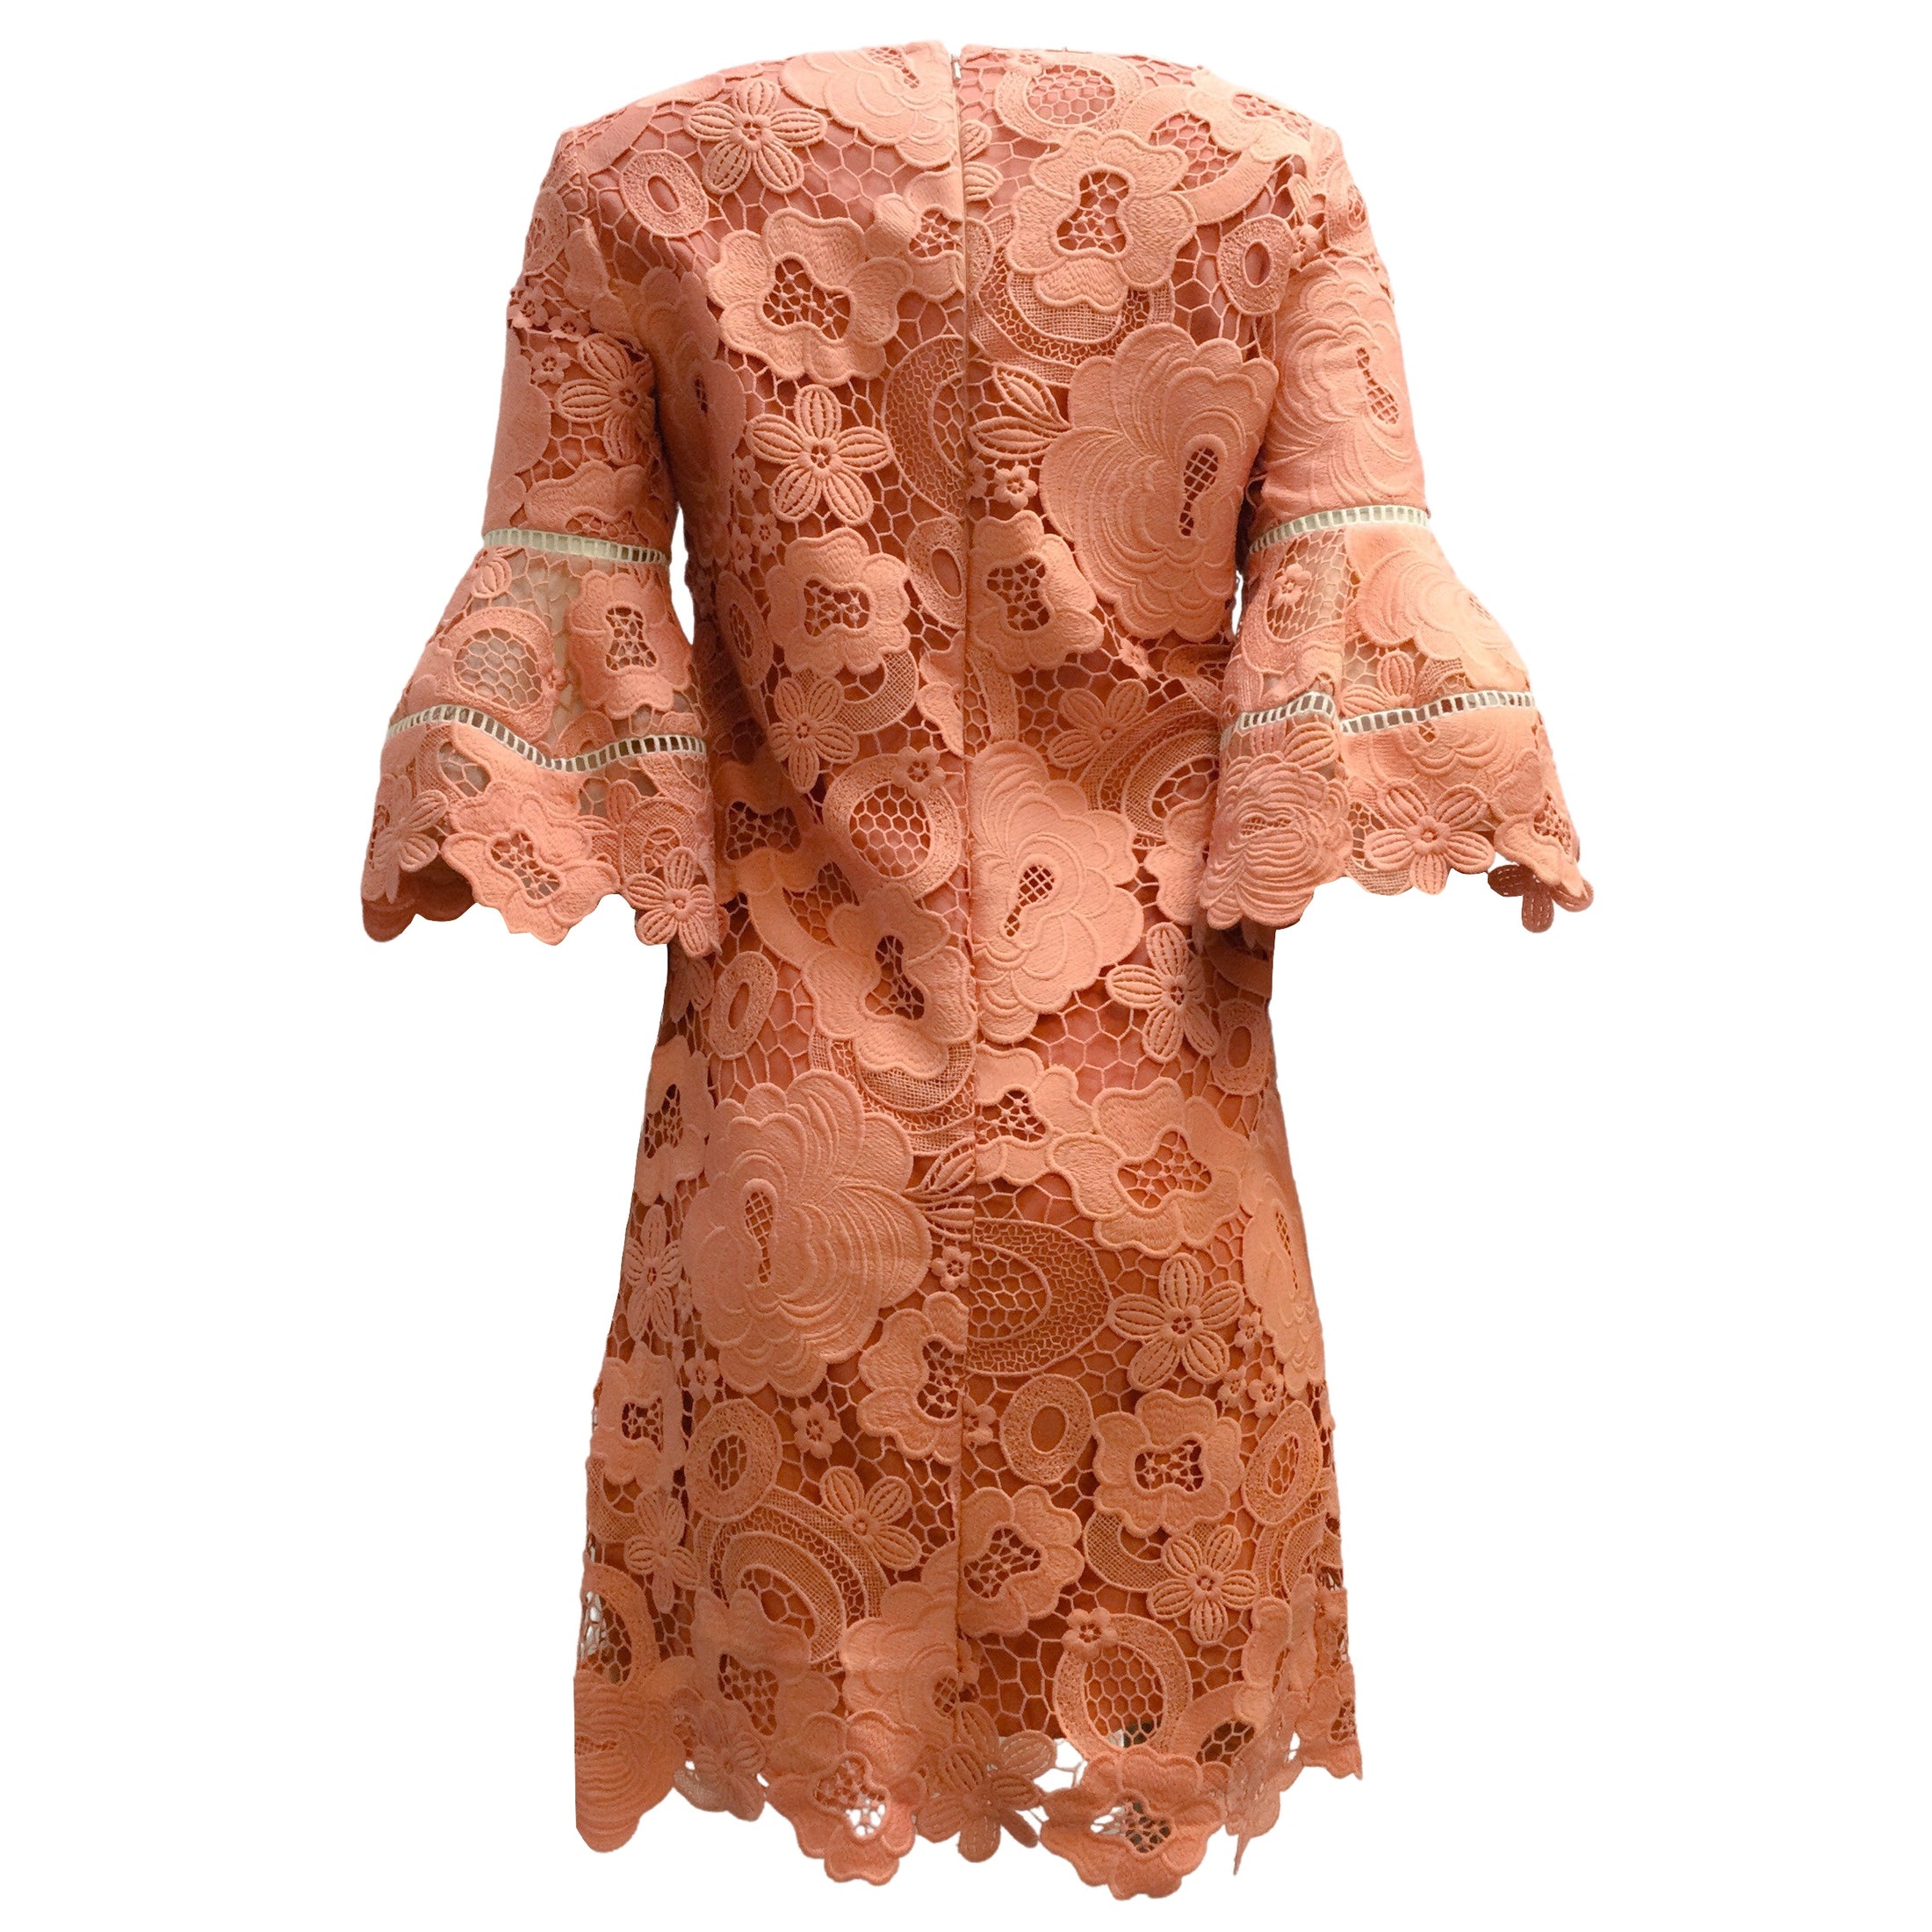 Lela Rose Peach Pink Bell Sleeved Floral Lace Cocktail Dress